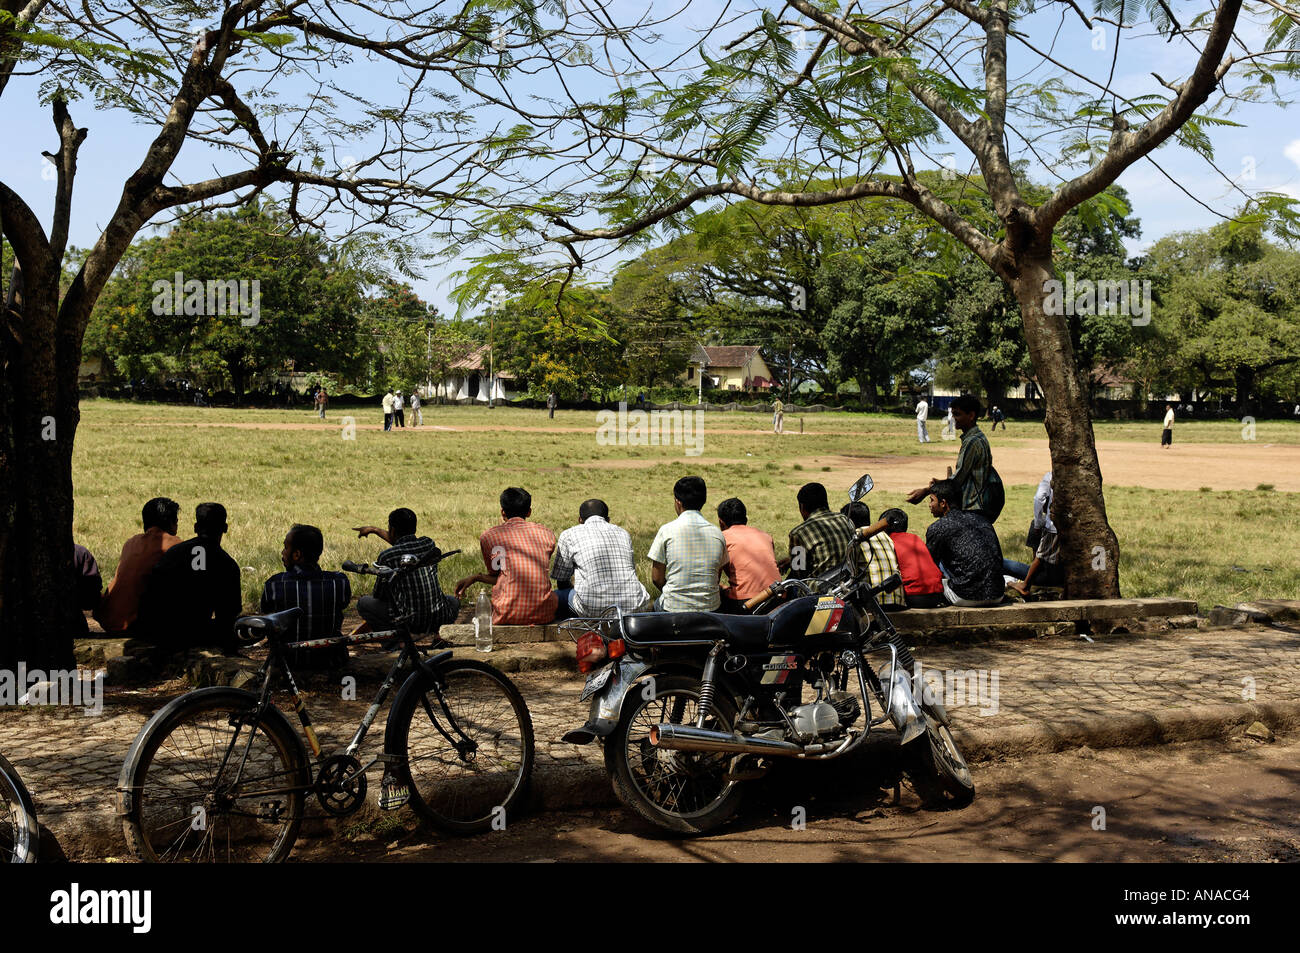 Boys watch a cricket game in Fort Kochin Stock Photo